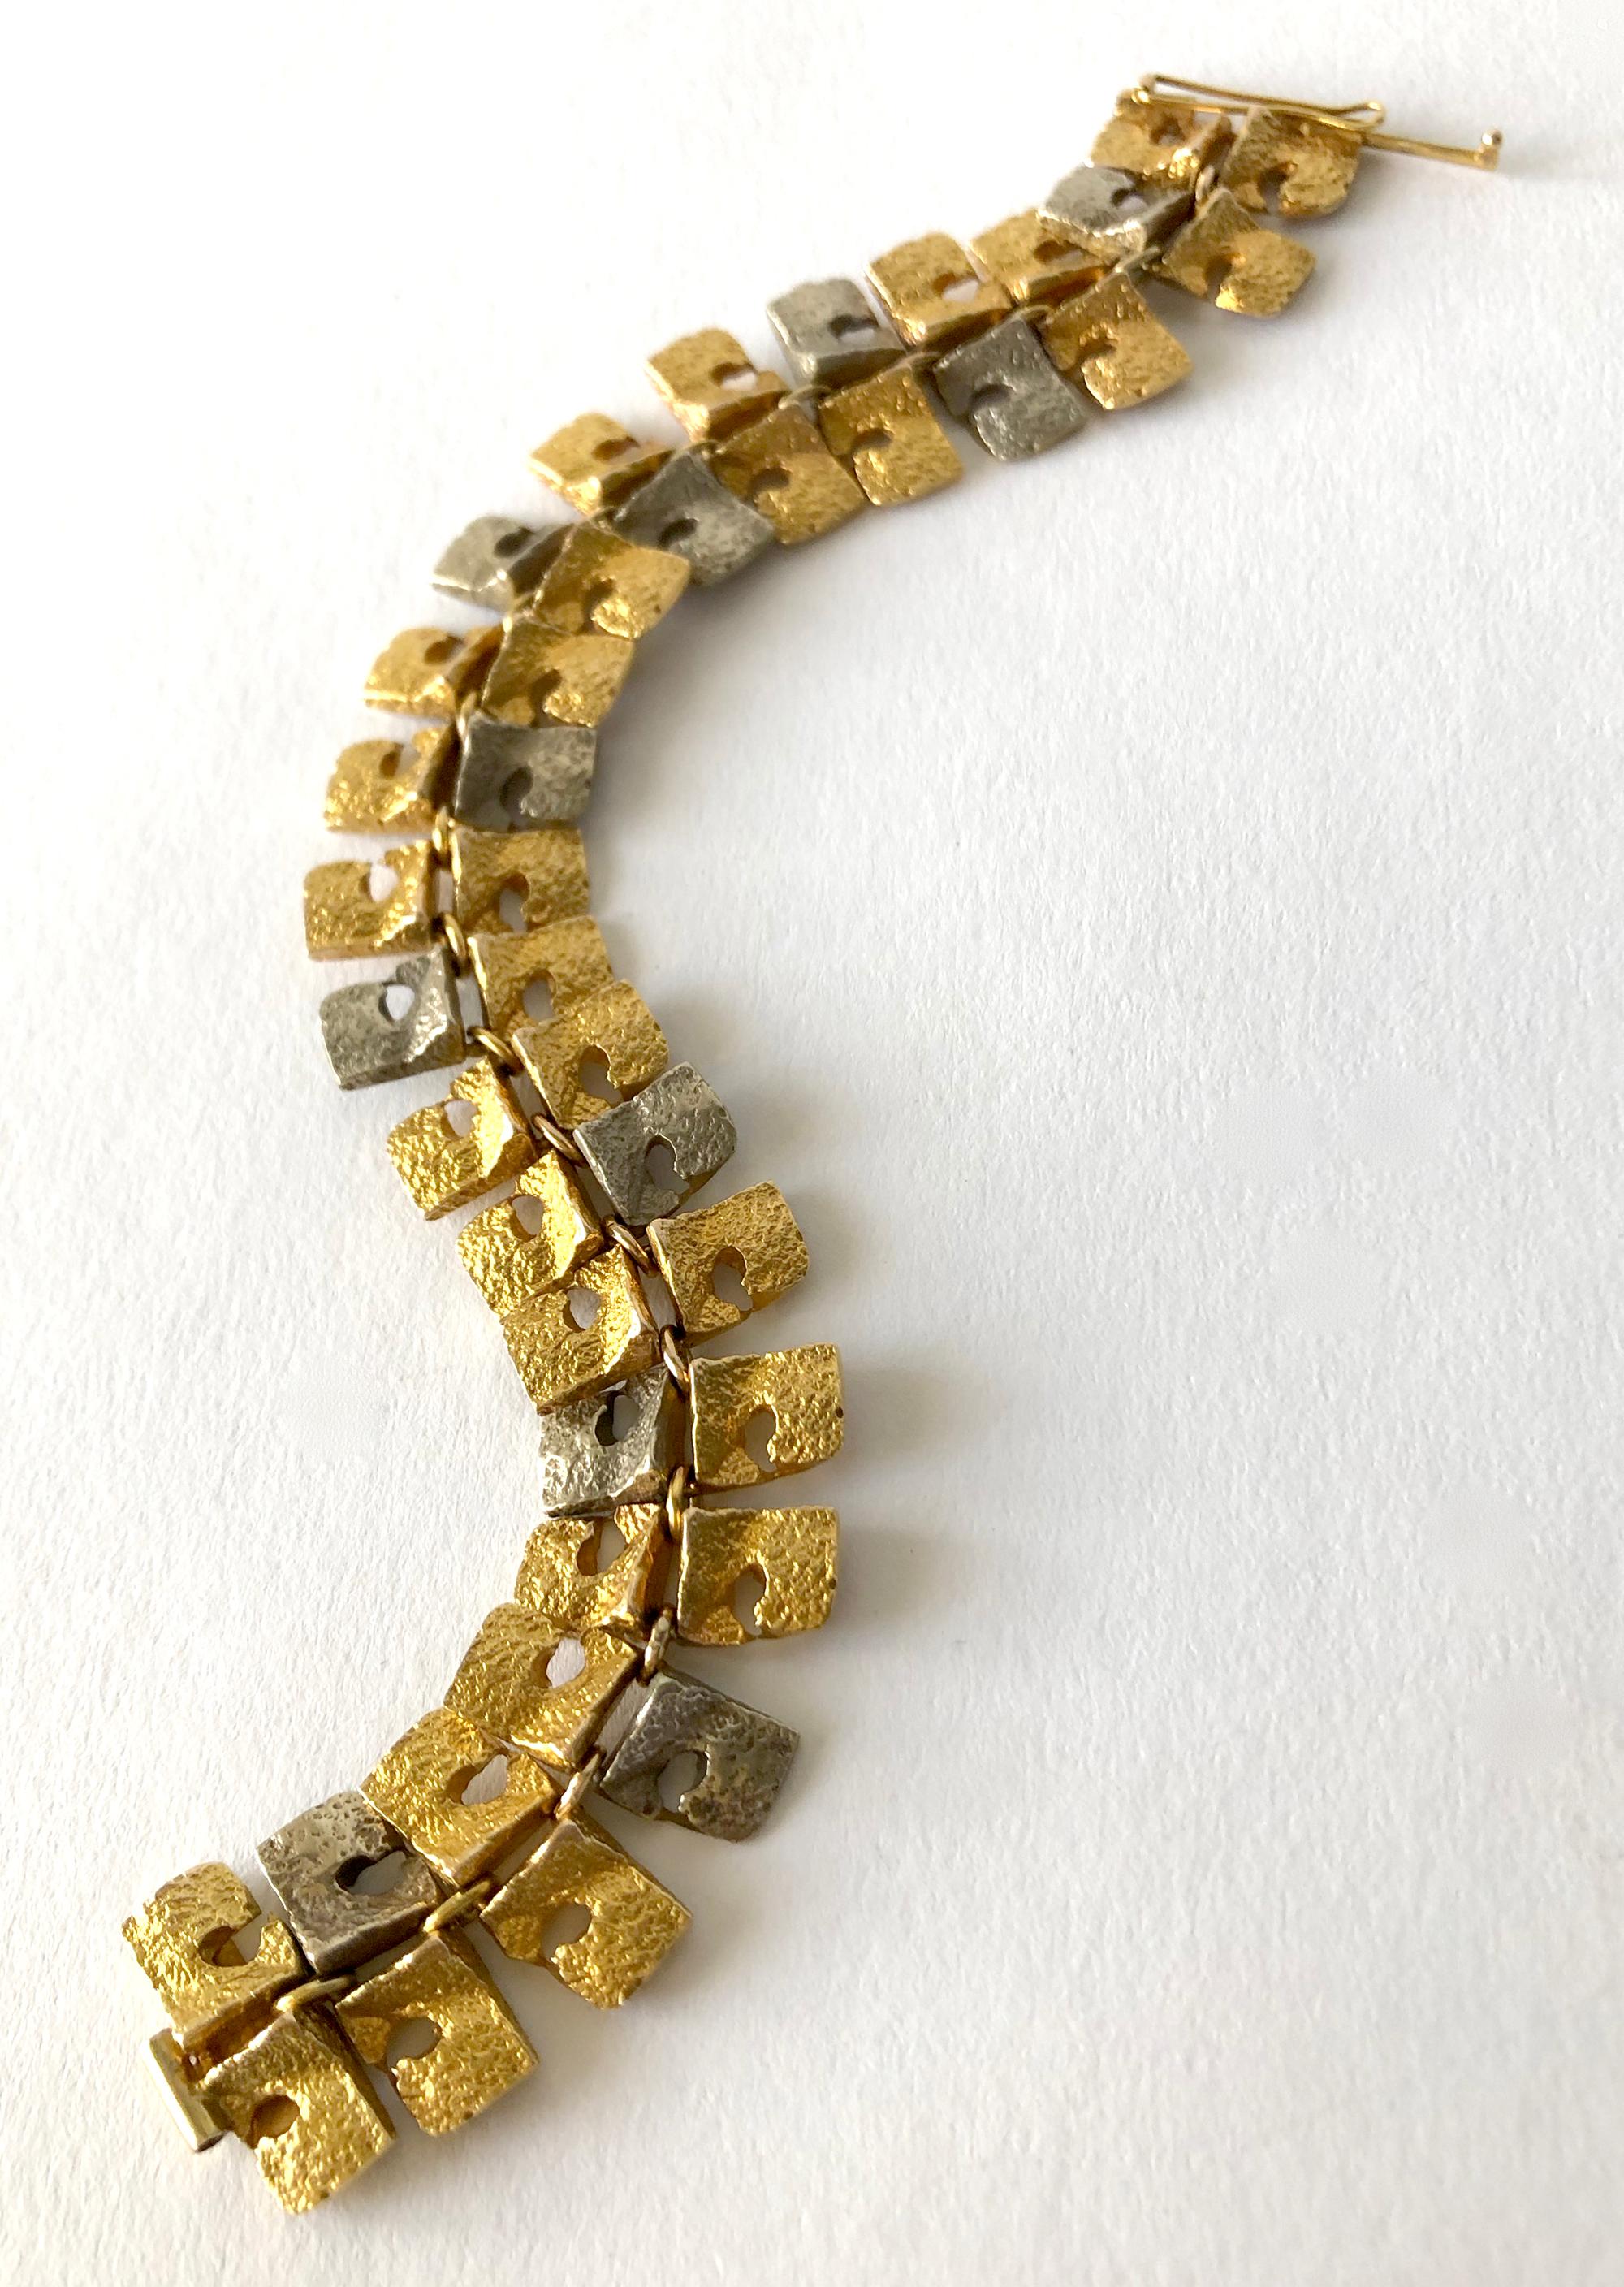 Textured white and yellow 14k gold linked bracelet created by master sculptor and jeweler Bjorn Weckstrom of Helsinki, Finland.  Bracelet measures 7.5